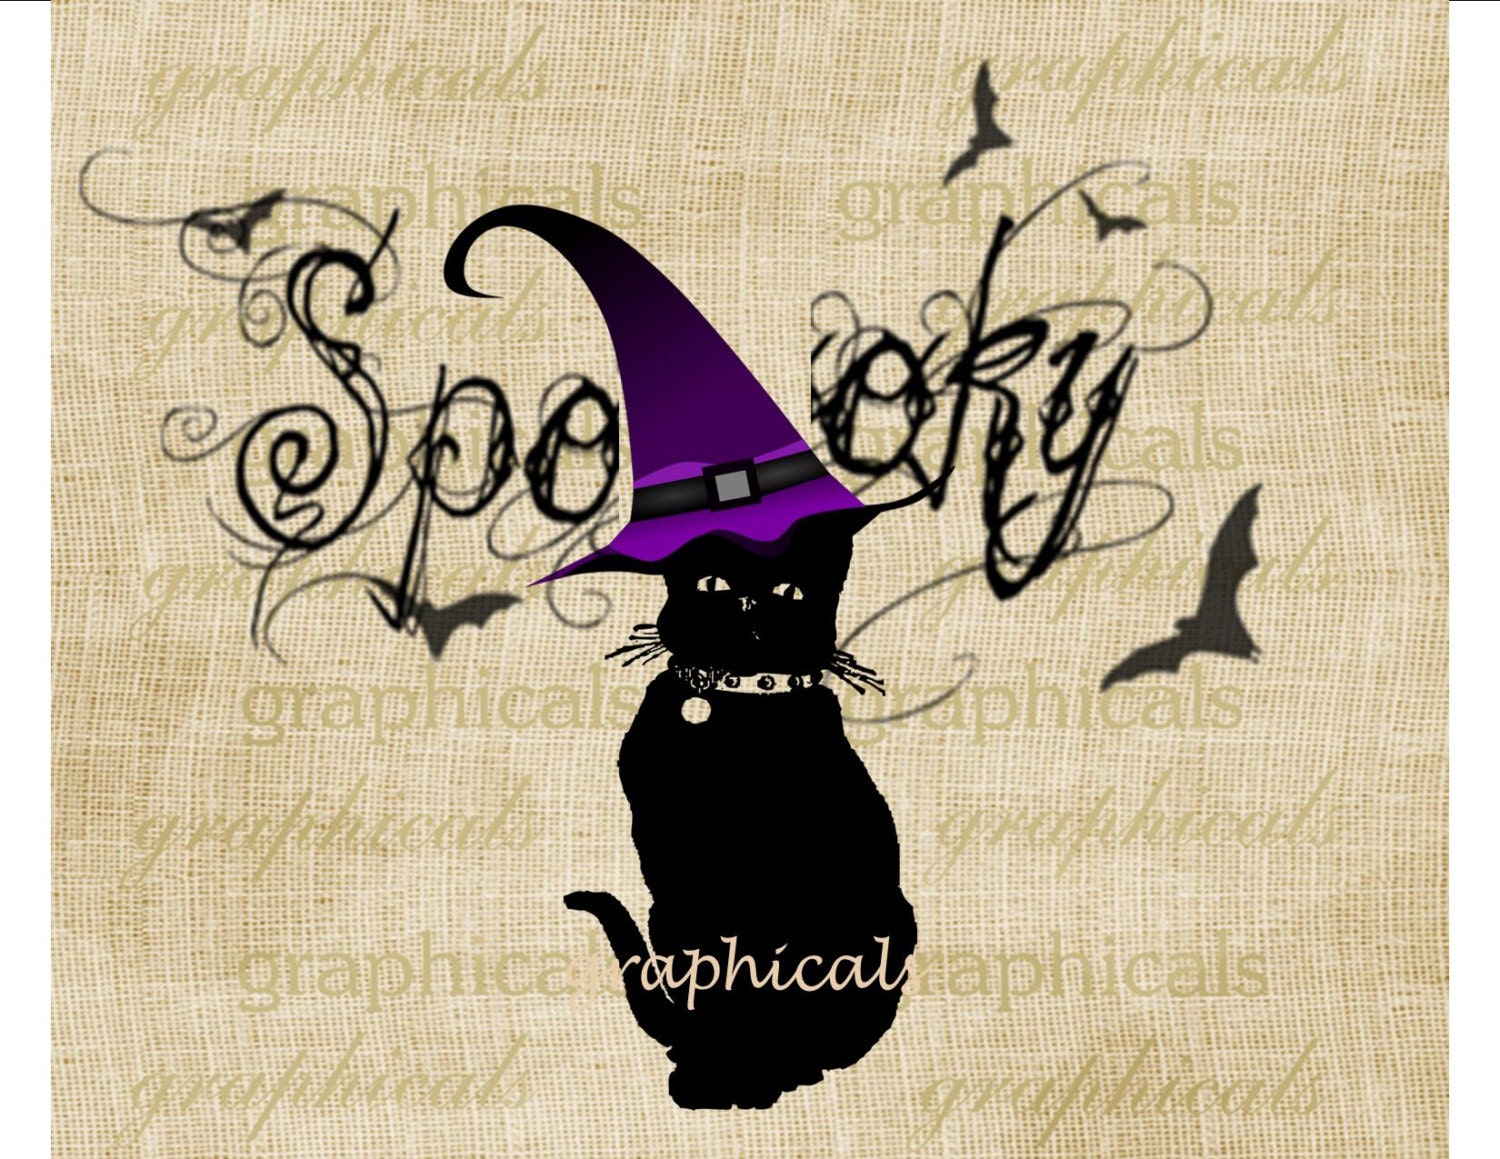 Halloween black cat Digital instant download image Spooky for iron on fabric transfer burlap decoupage tags pillows totebags Item No 2051 - graphicals